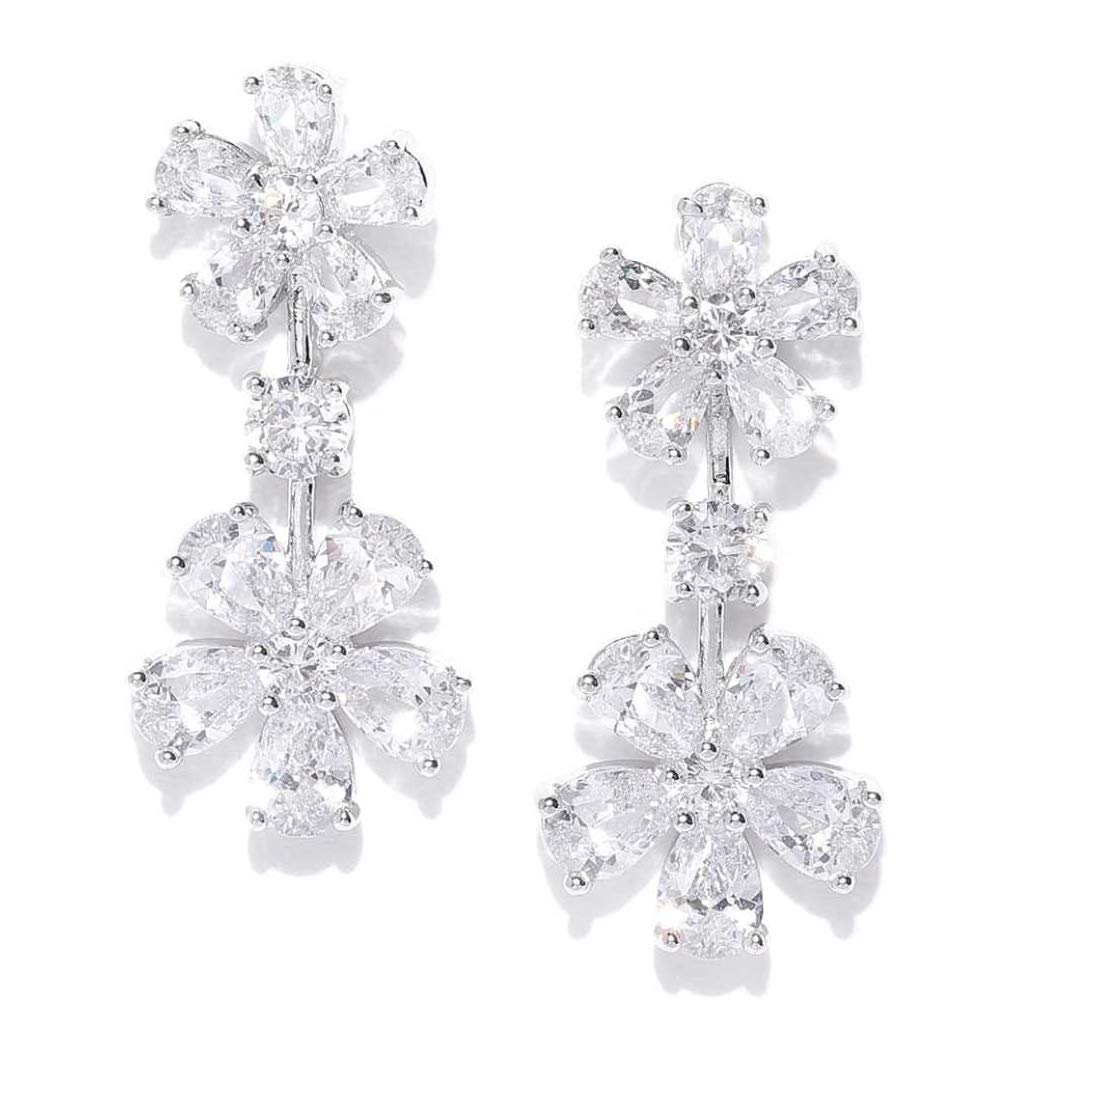 Yellow Chimes Elegant Latest Fashion Silver Plated White Floral Crystal designer Drop Earrings for Women and Girls